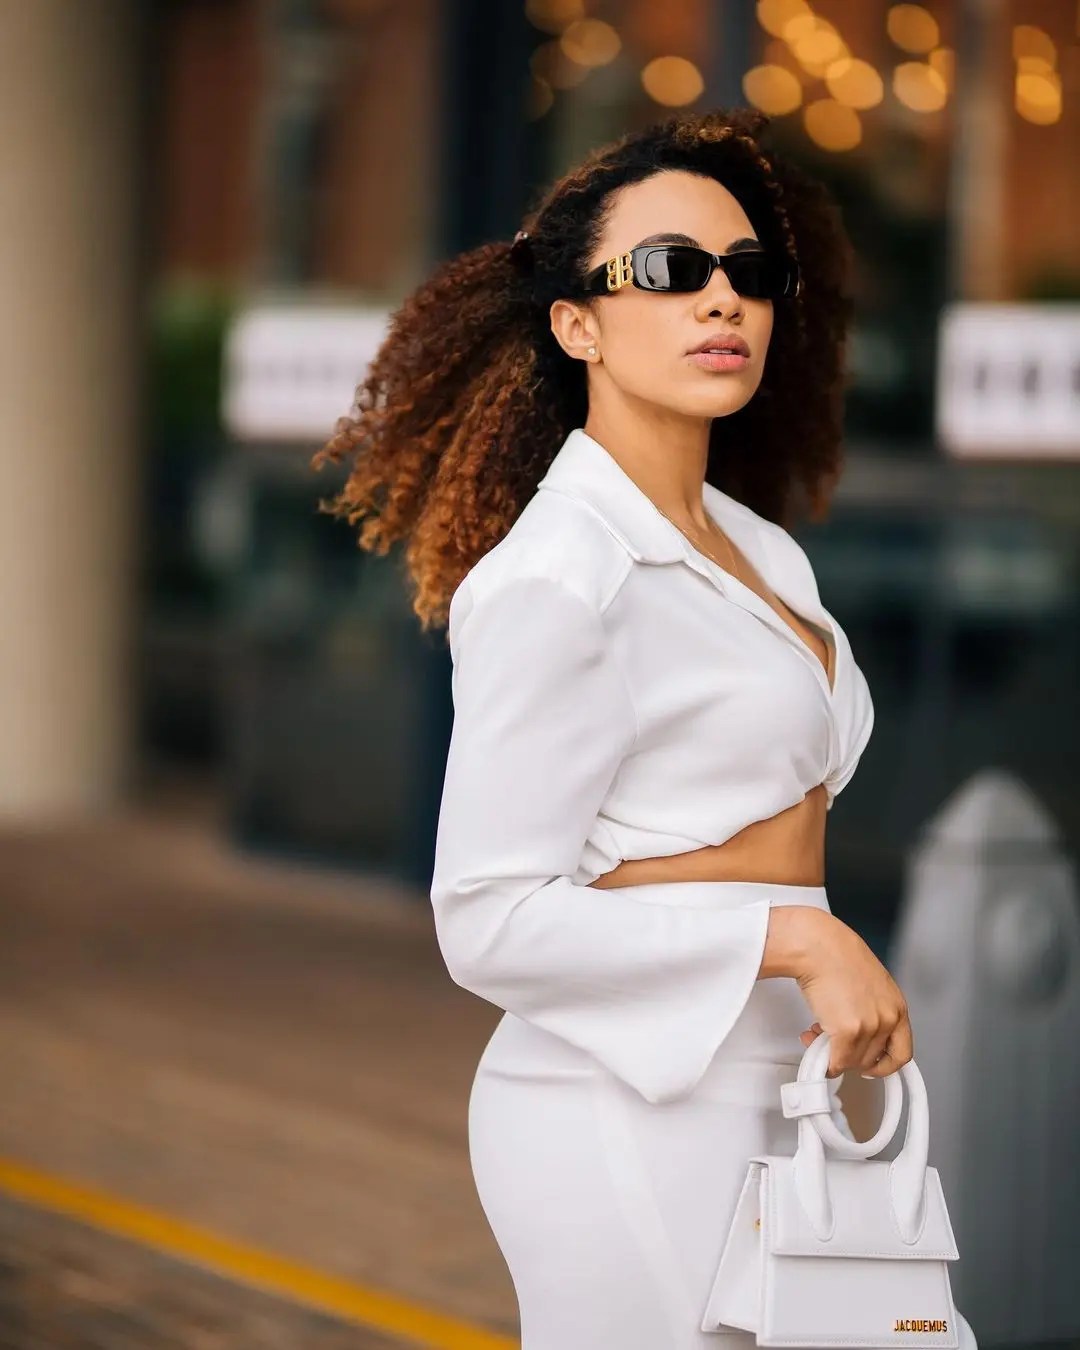 These are the things you probably didn’t know about actress Amanda du-Pont